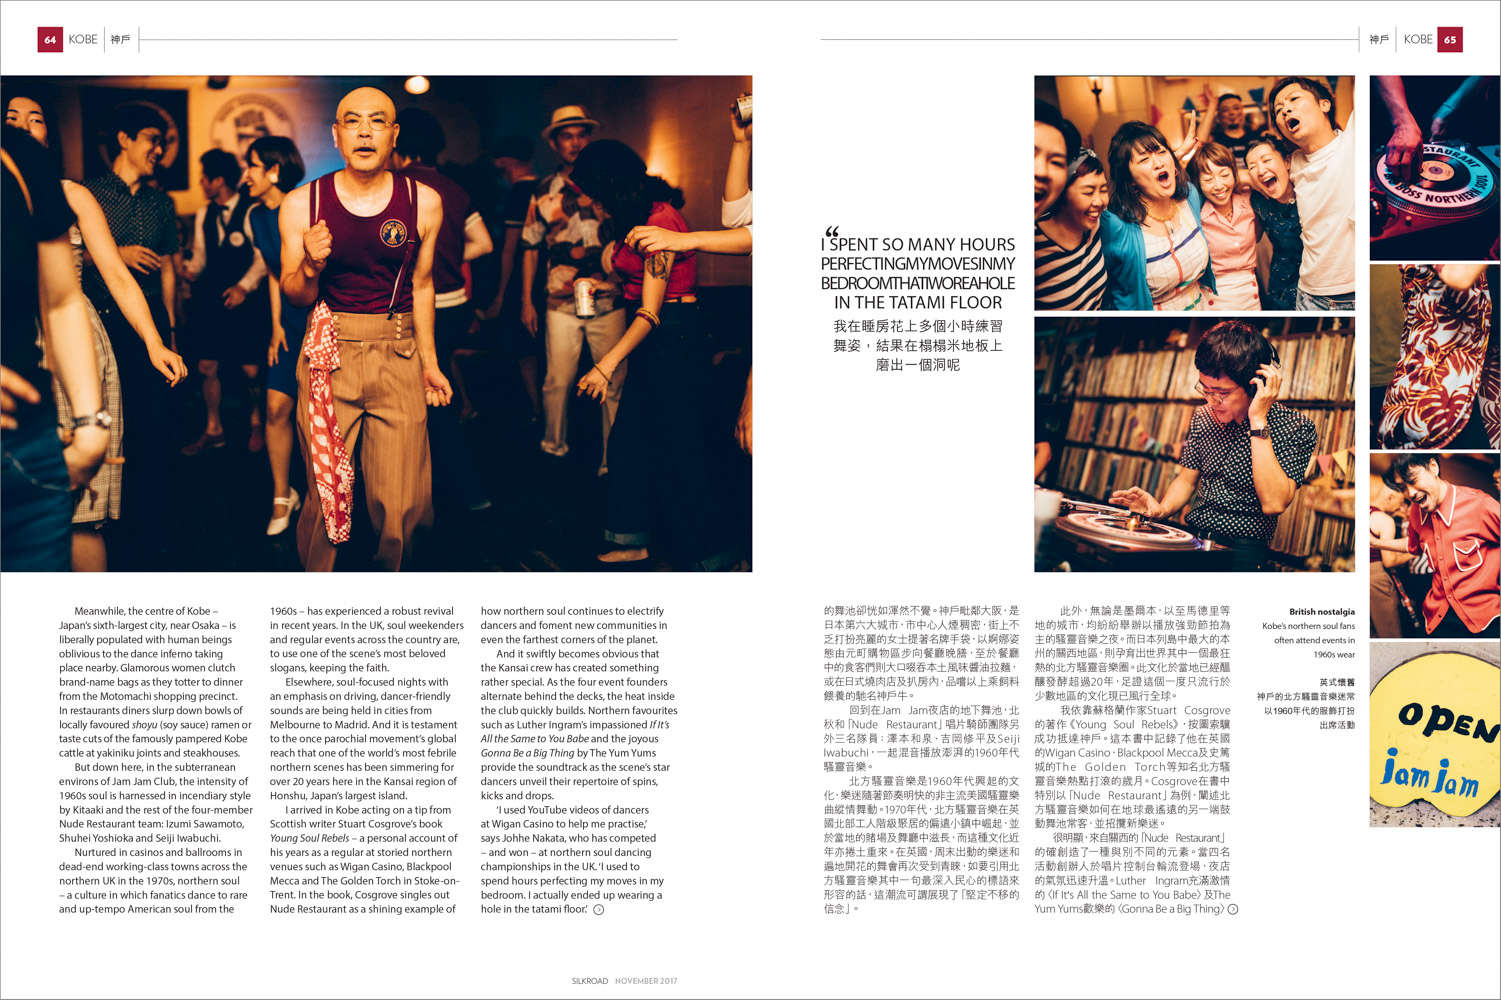 A feature story about the Northern Soul movement in Kobe, Japan.